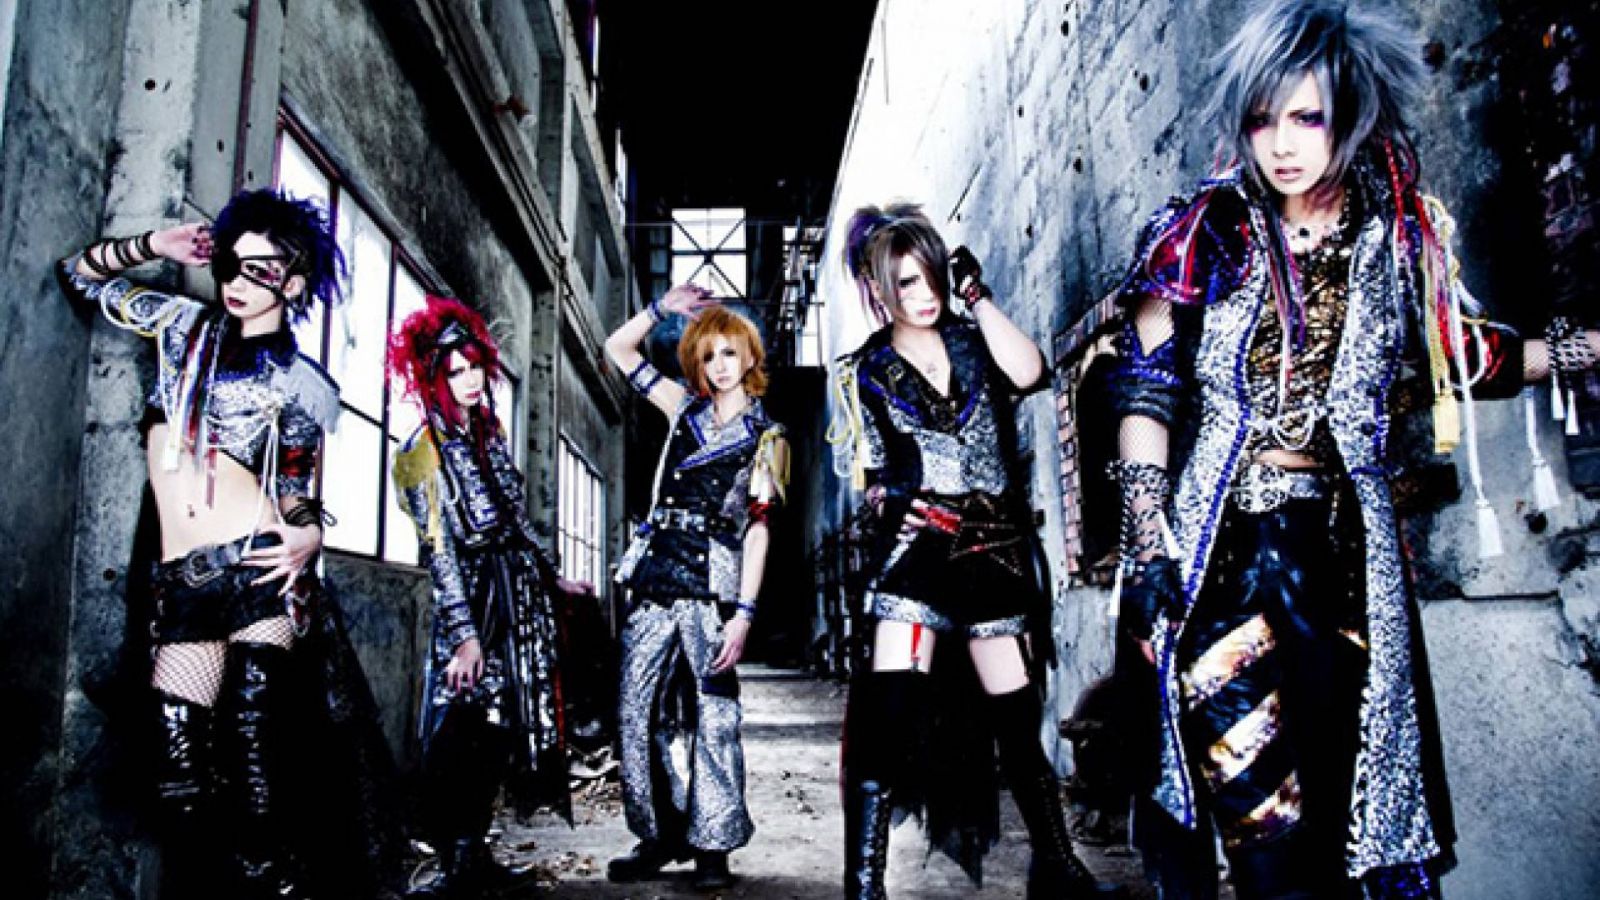 Royz © Royz. All Rights Reserved.